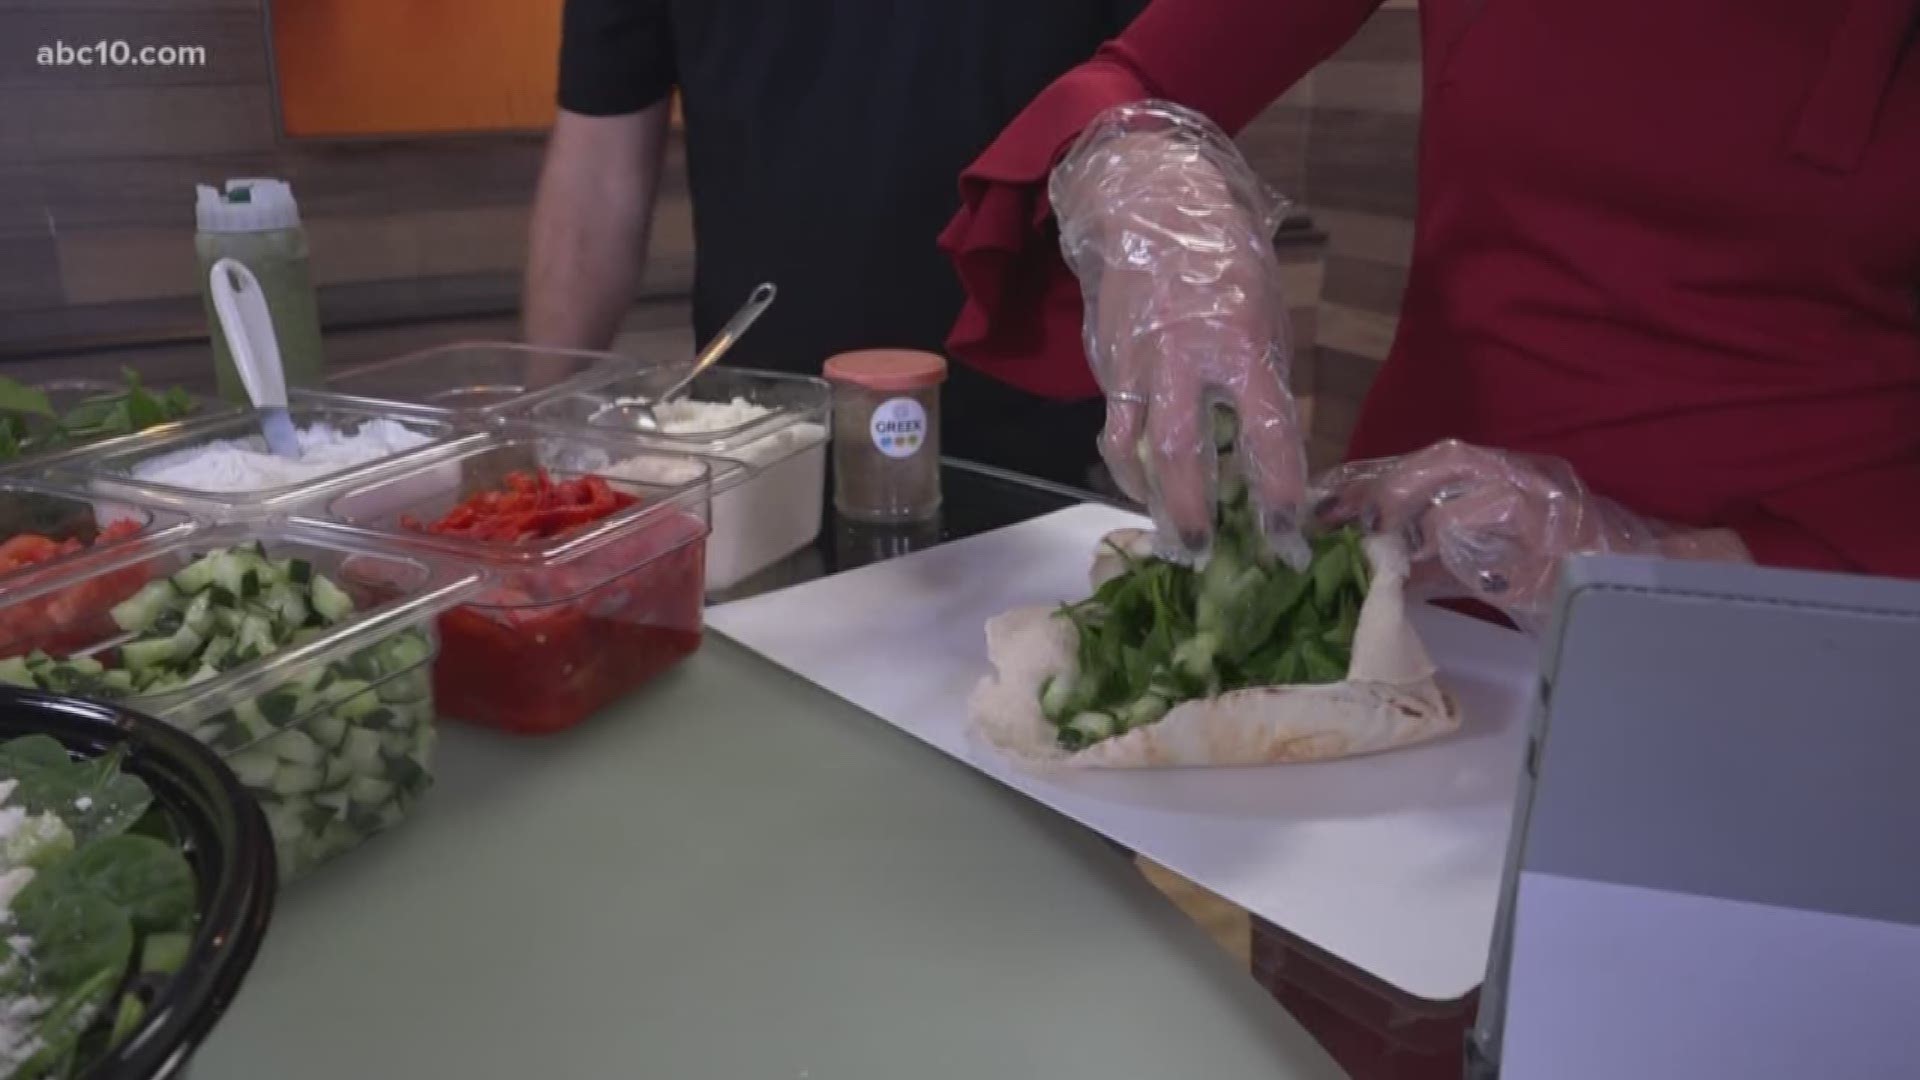 Let's face it: most of us will not be watching the calories too closely during the holidays. Local Pita Pit franchisee Jesse Gonzalez shows us how to whip up some healthy, fresh meals.